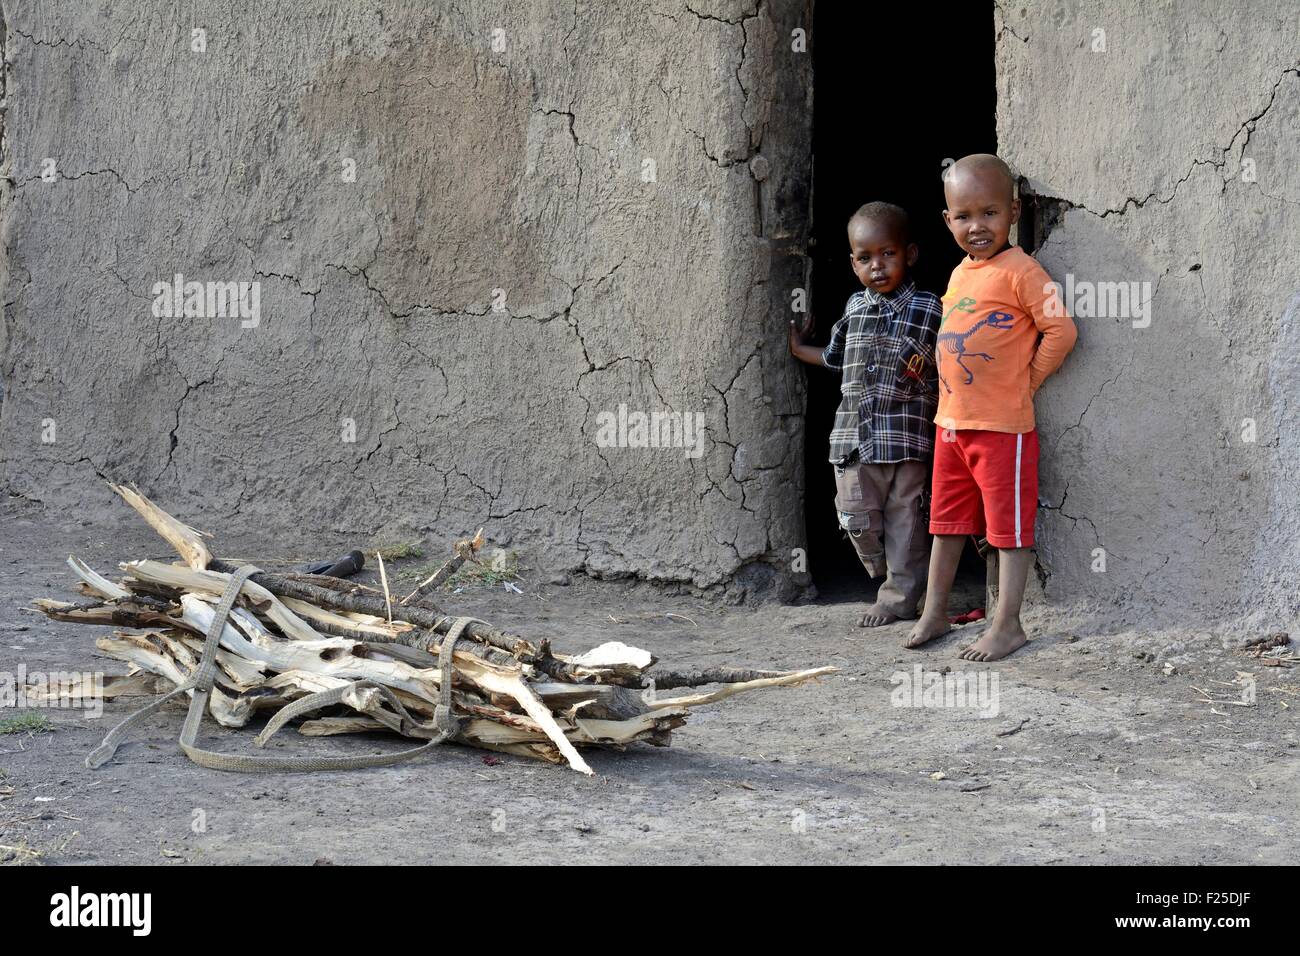 Kenya, Masai Mara Reserve, Masai young children at the entrance of their box a bundle of wood placed on the floor Stock Photo